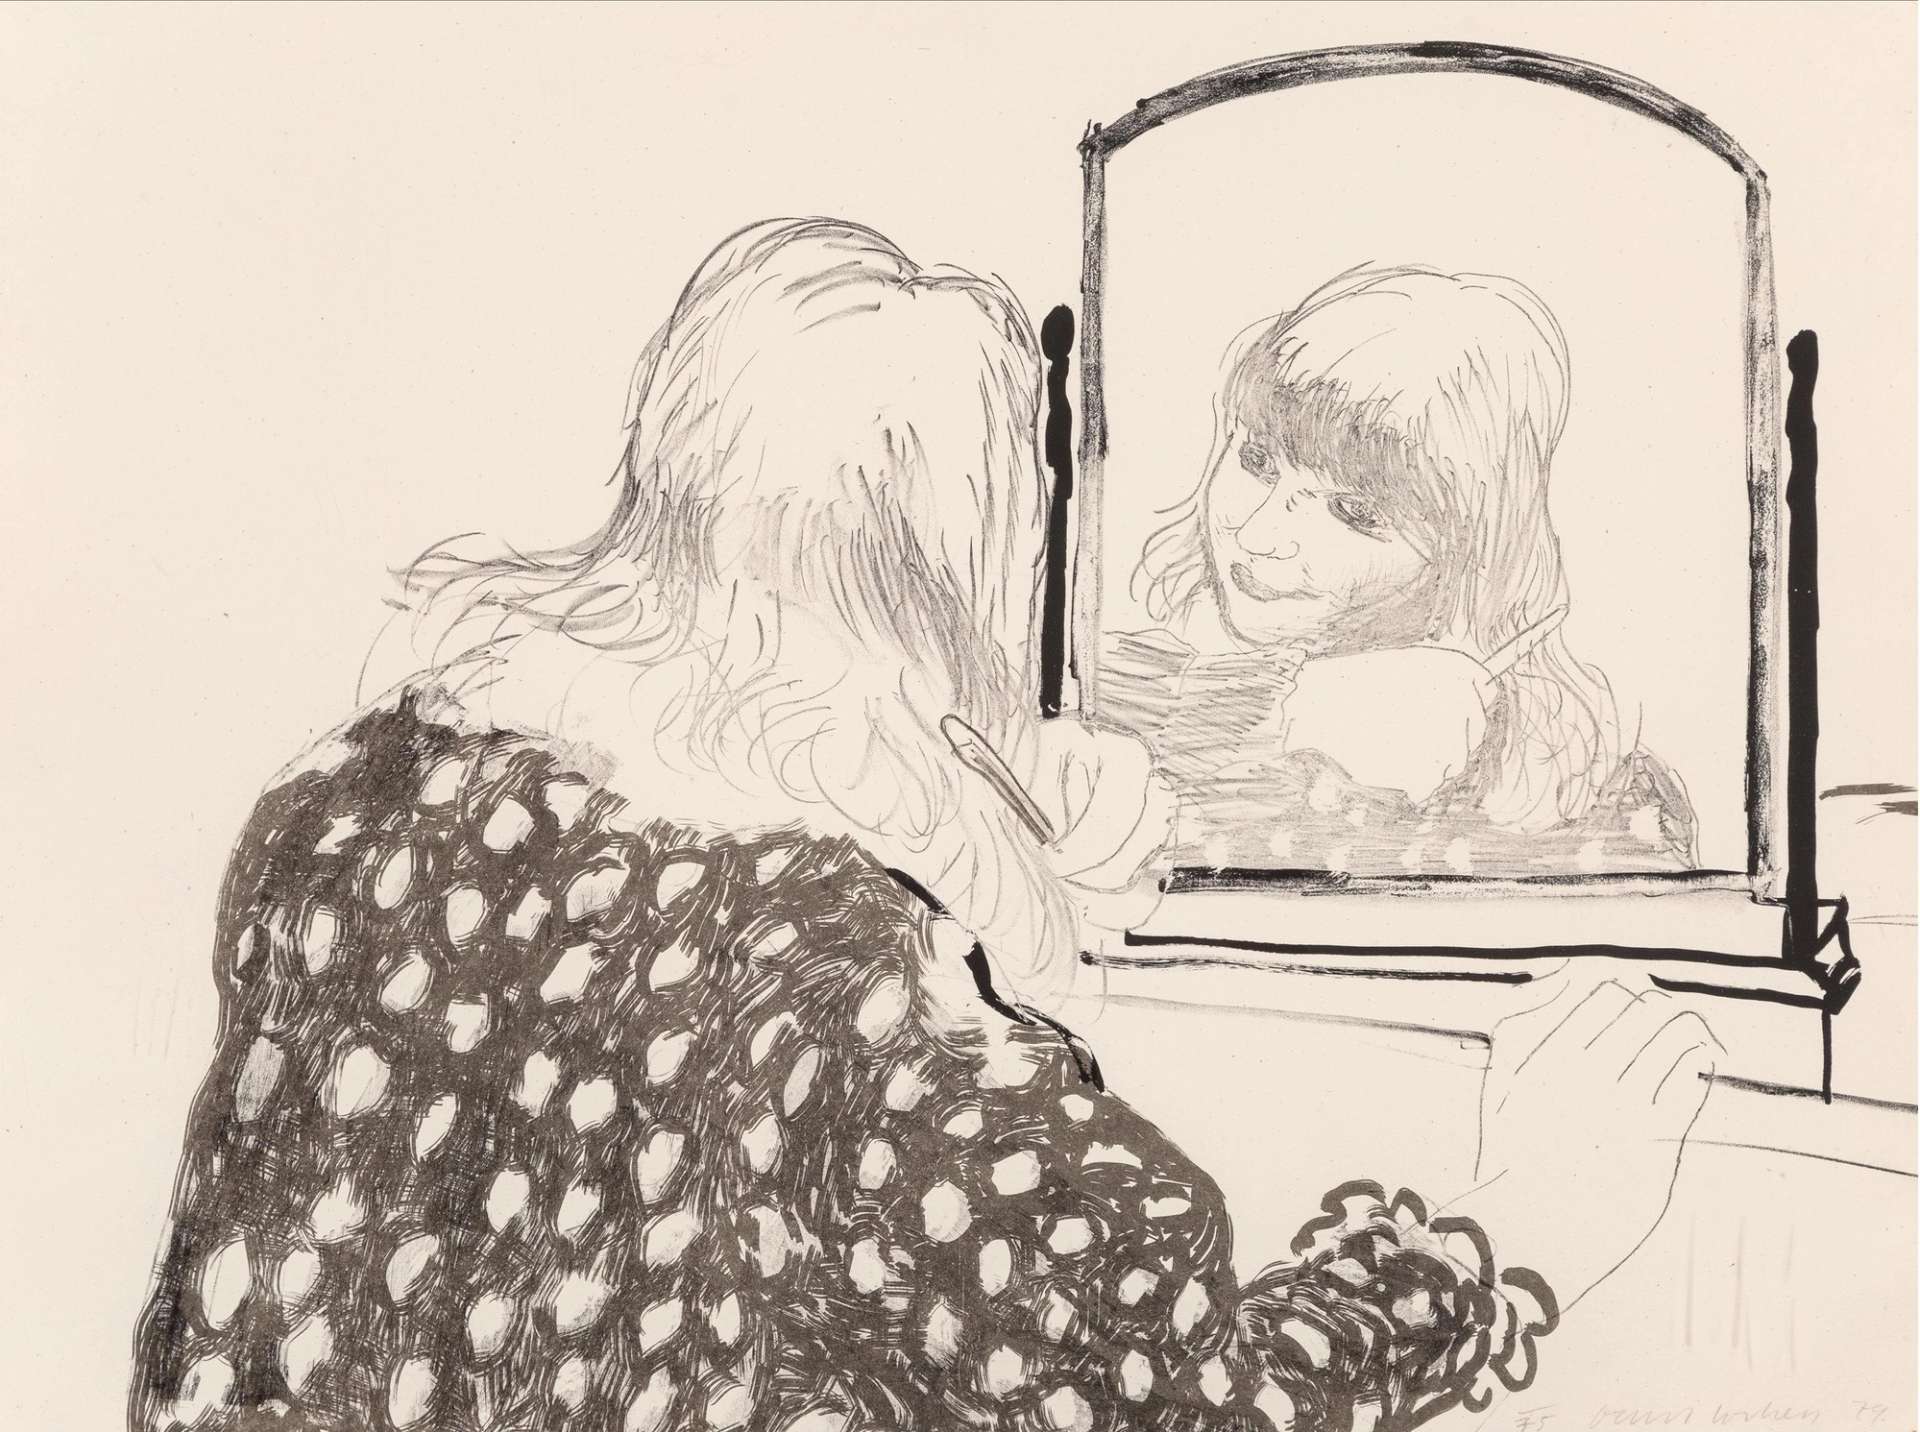 David Hockney’s Ann Combing Her Hair. A lithographic print of a woman wearing a polka dot style garment, looking into a mirror as she combs her hair.